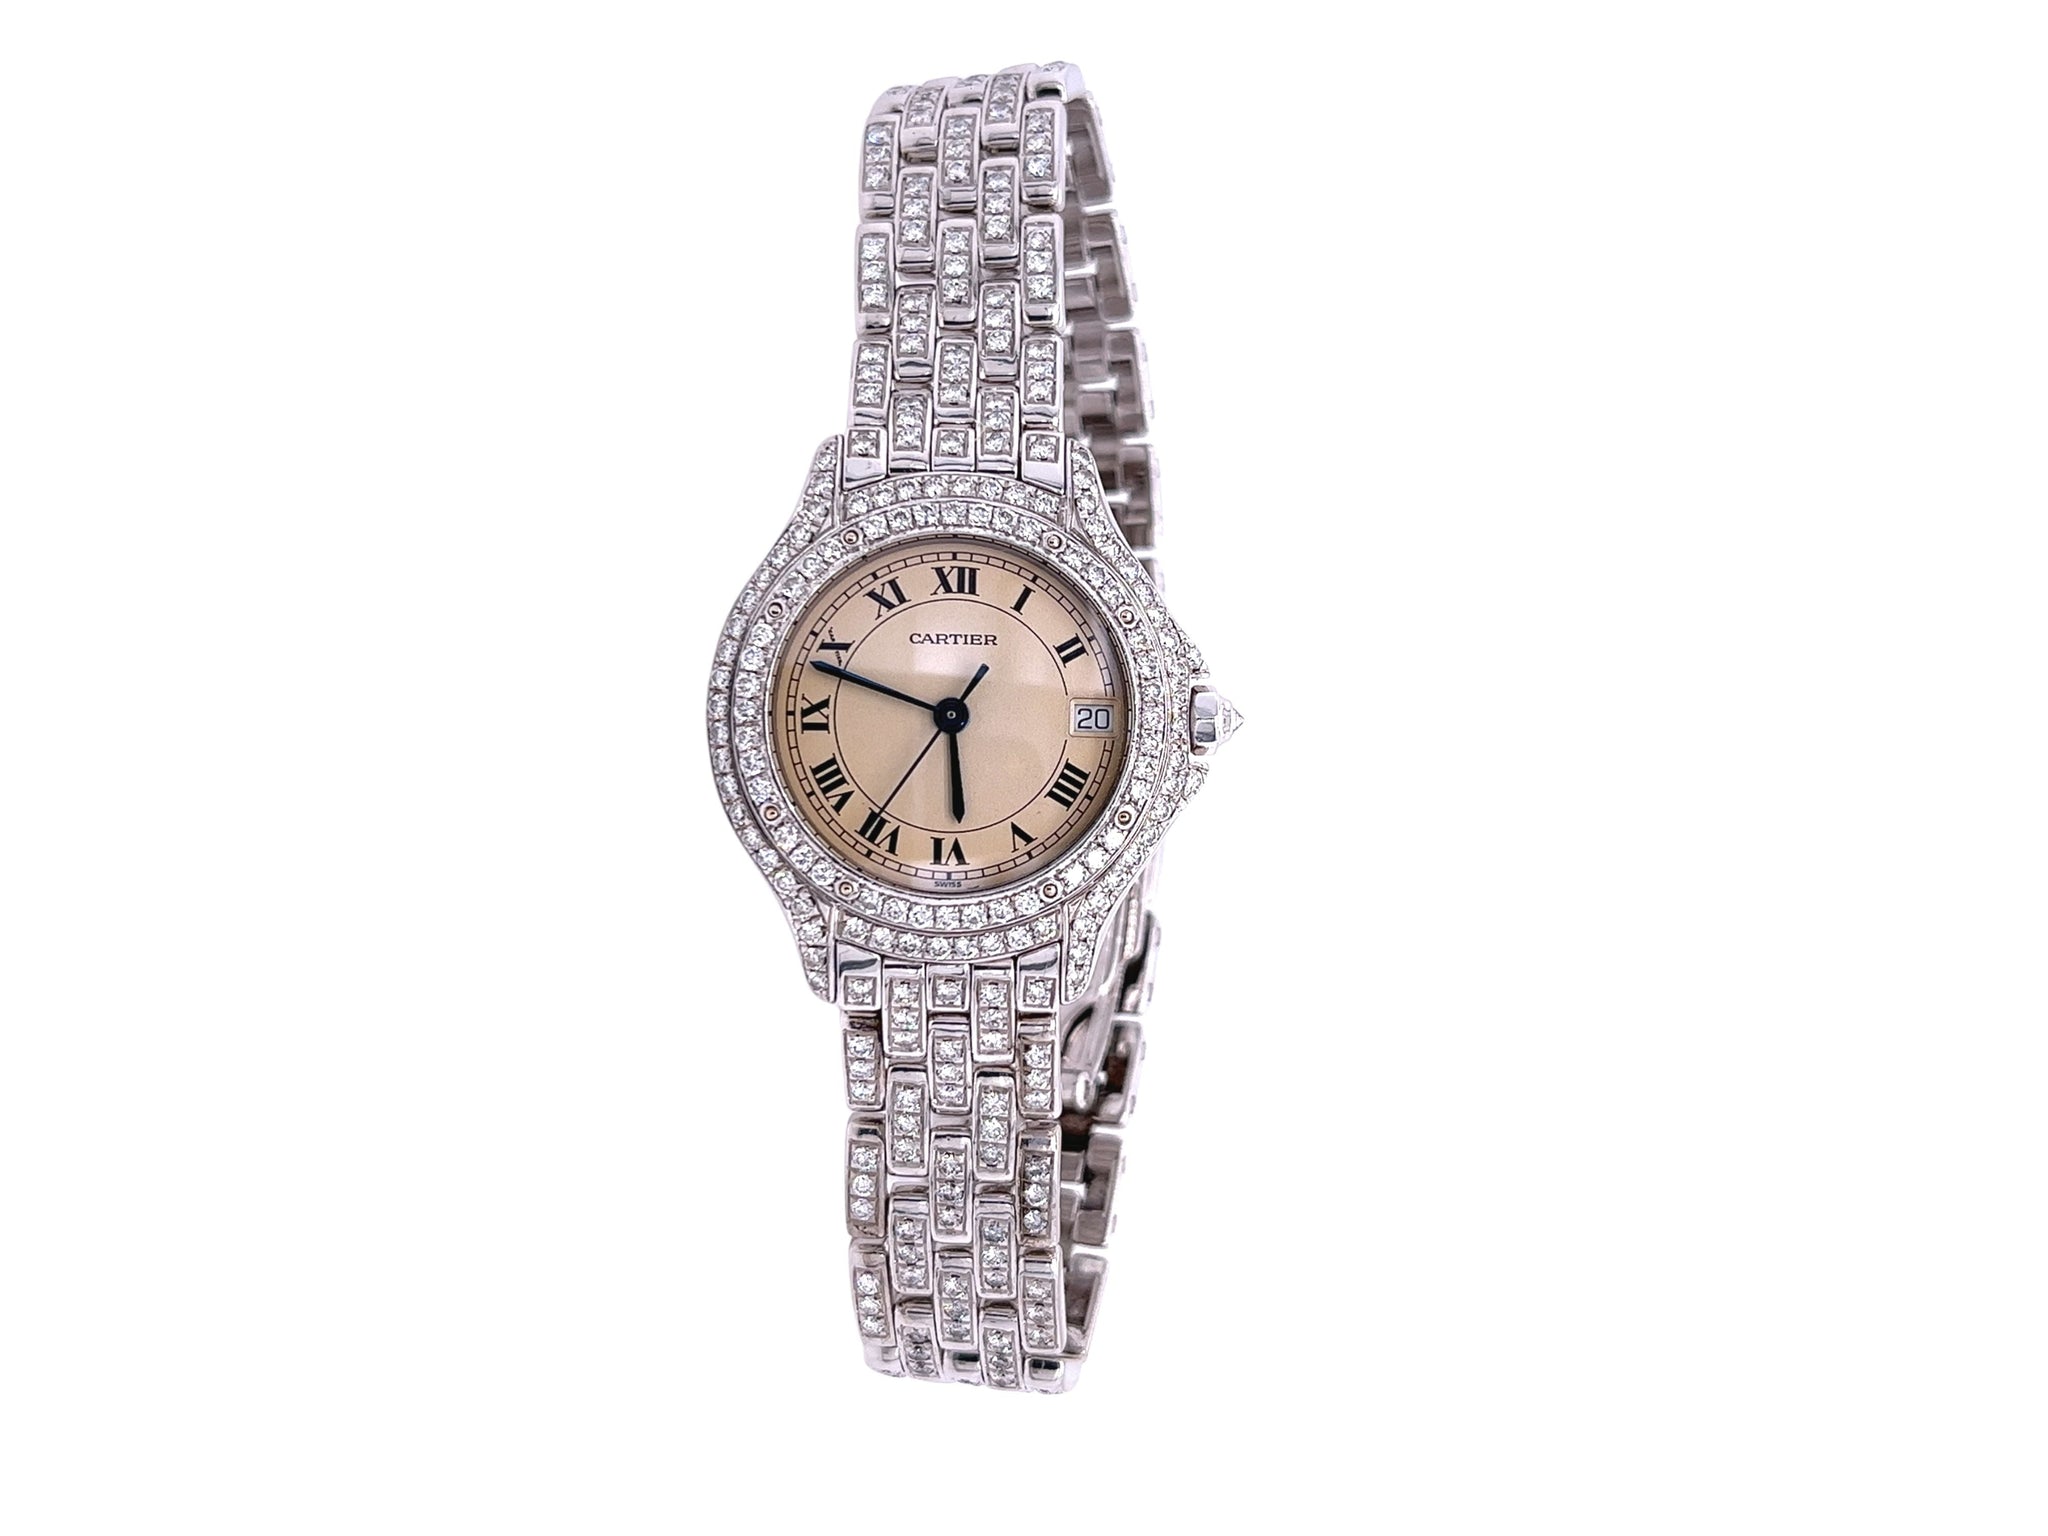 Vintage Cartier 28mm Round Dial Ballon Watch in 18k White Gold with Diamonds-Watches-ASSAY